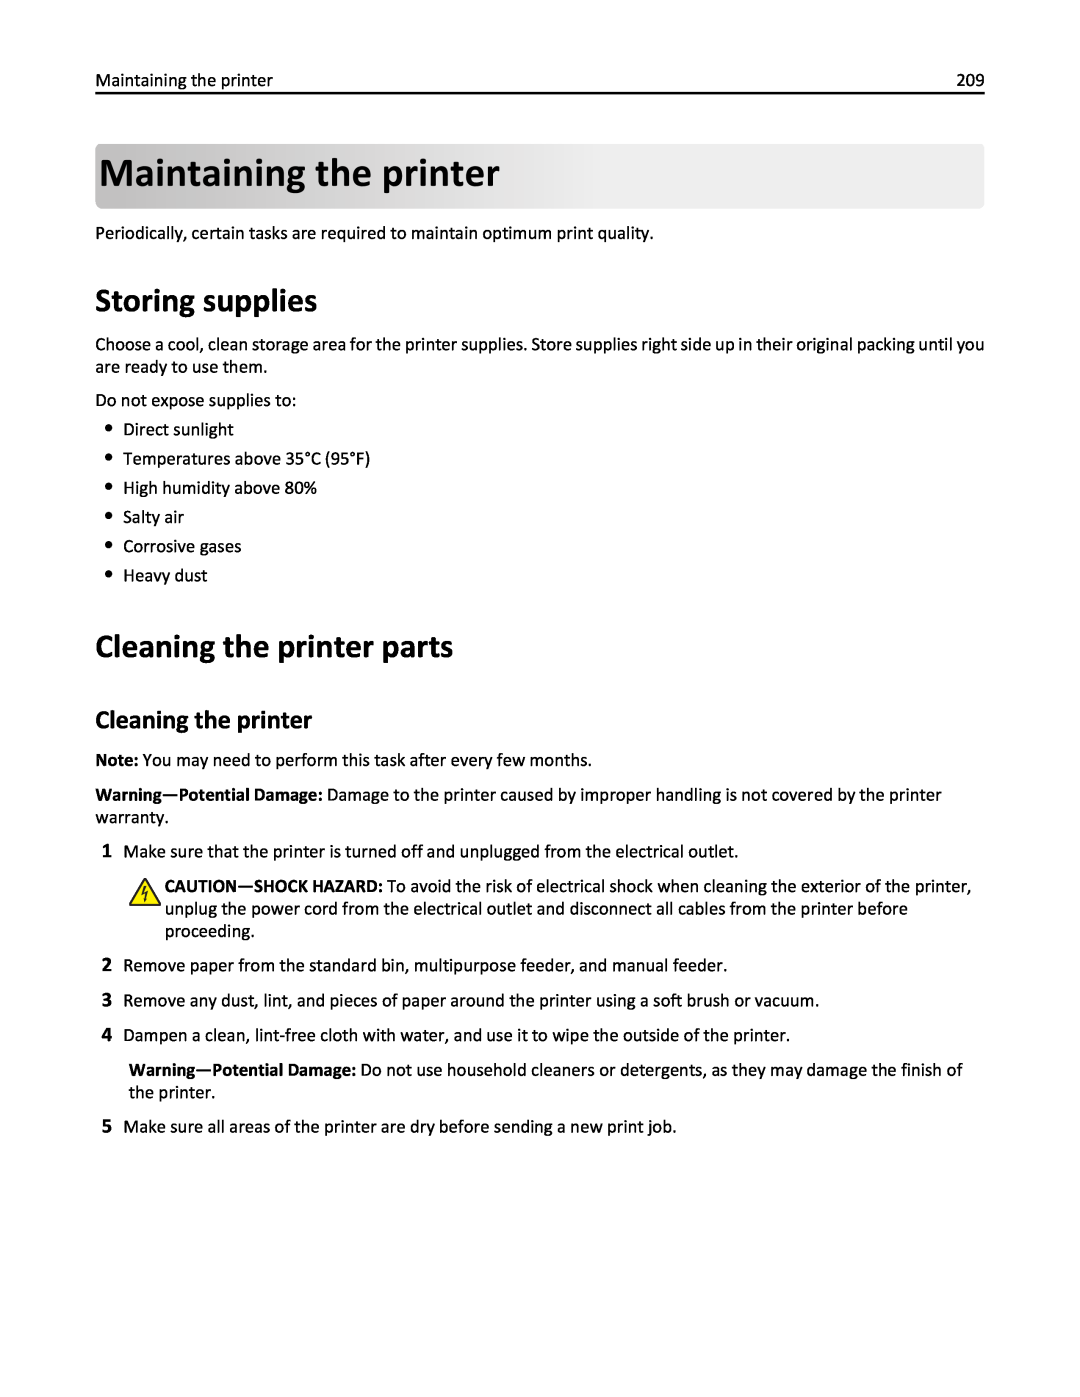 Lexmark 436 manual Maintaining the printer, Storing supplies, Cleaning the printer parts 